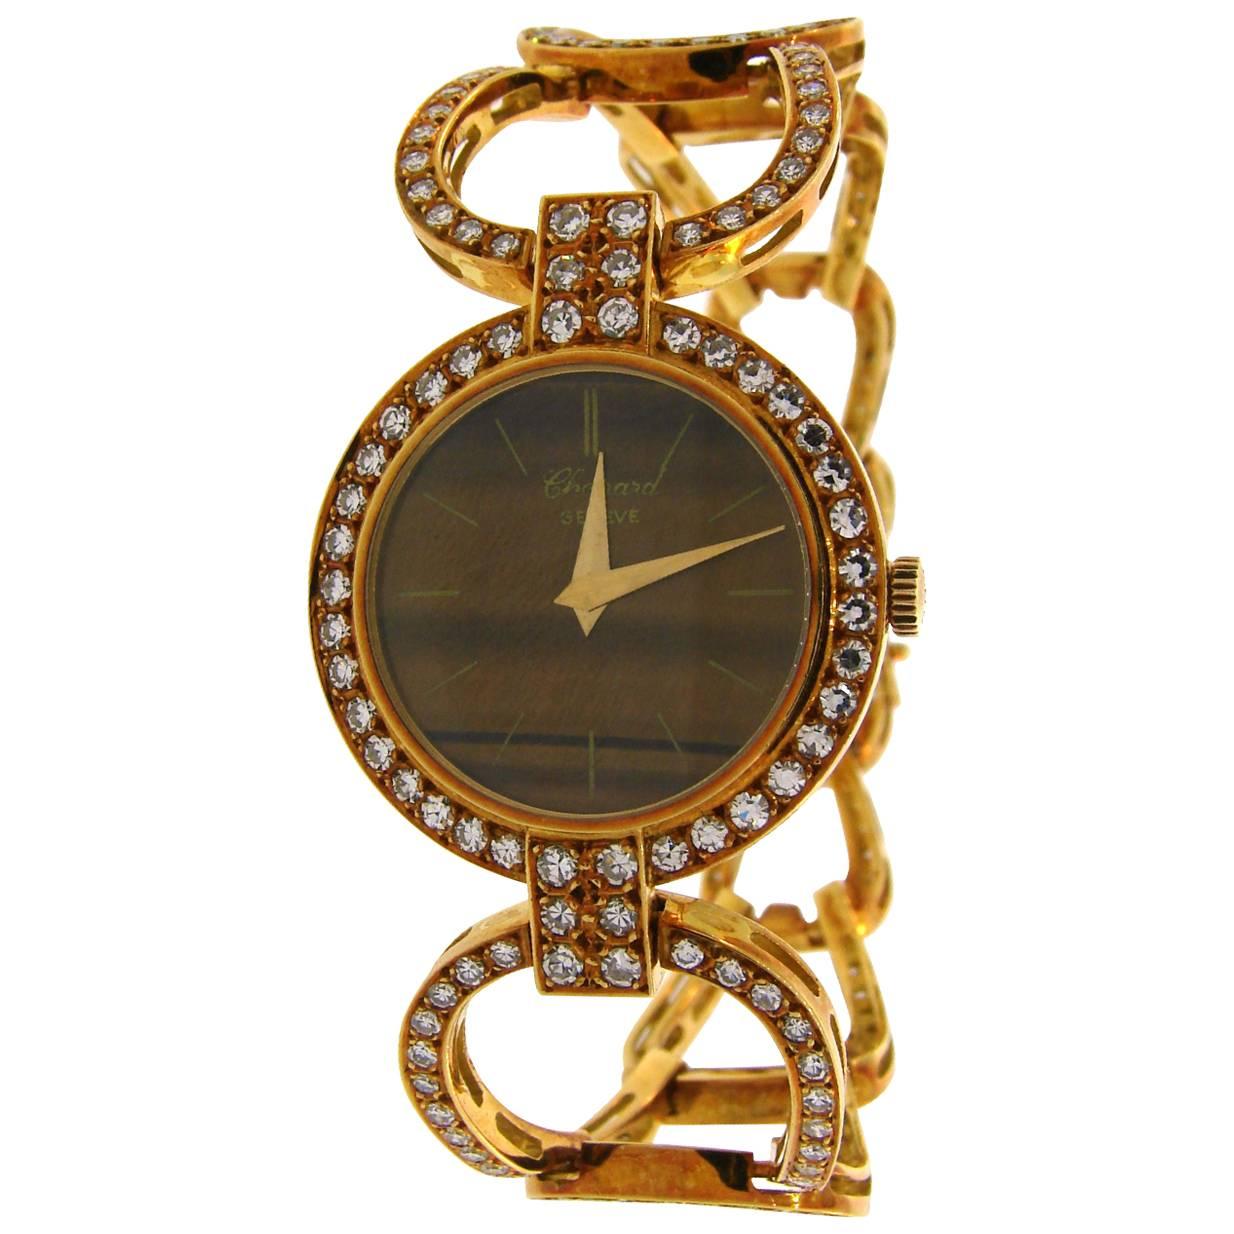 Beautiful feminine watch created by Chopard in the 1970s. Tasteful combination of earthy colored Tiger's Eye and yellow gold with splashes of sparkly diamonds, perfect proportions and light openwork design are the highlights of this lovely vintage